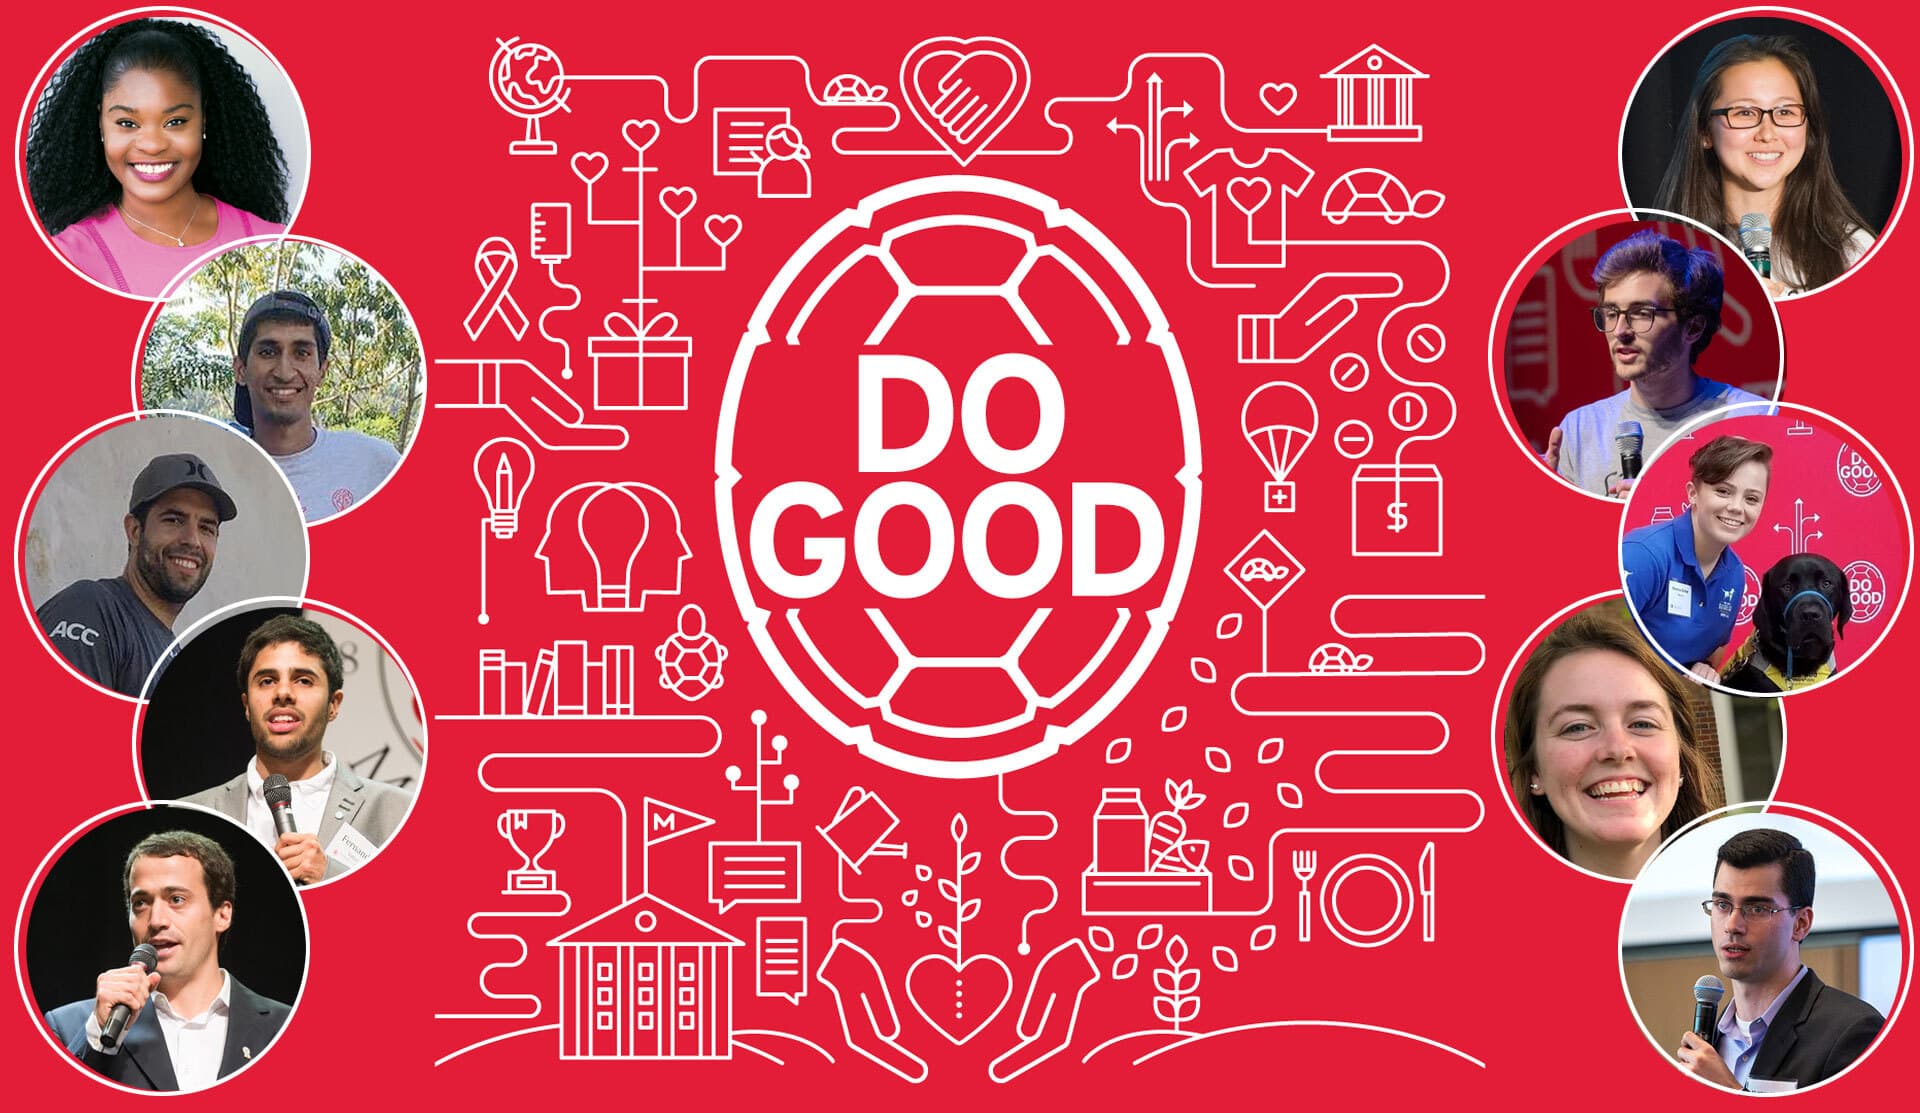 Collage of 10 Do Good Challenges participants